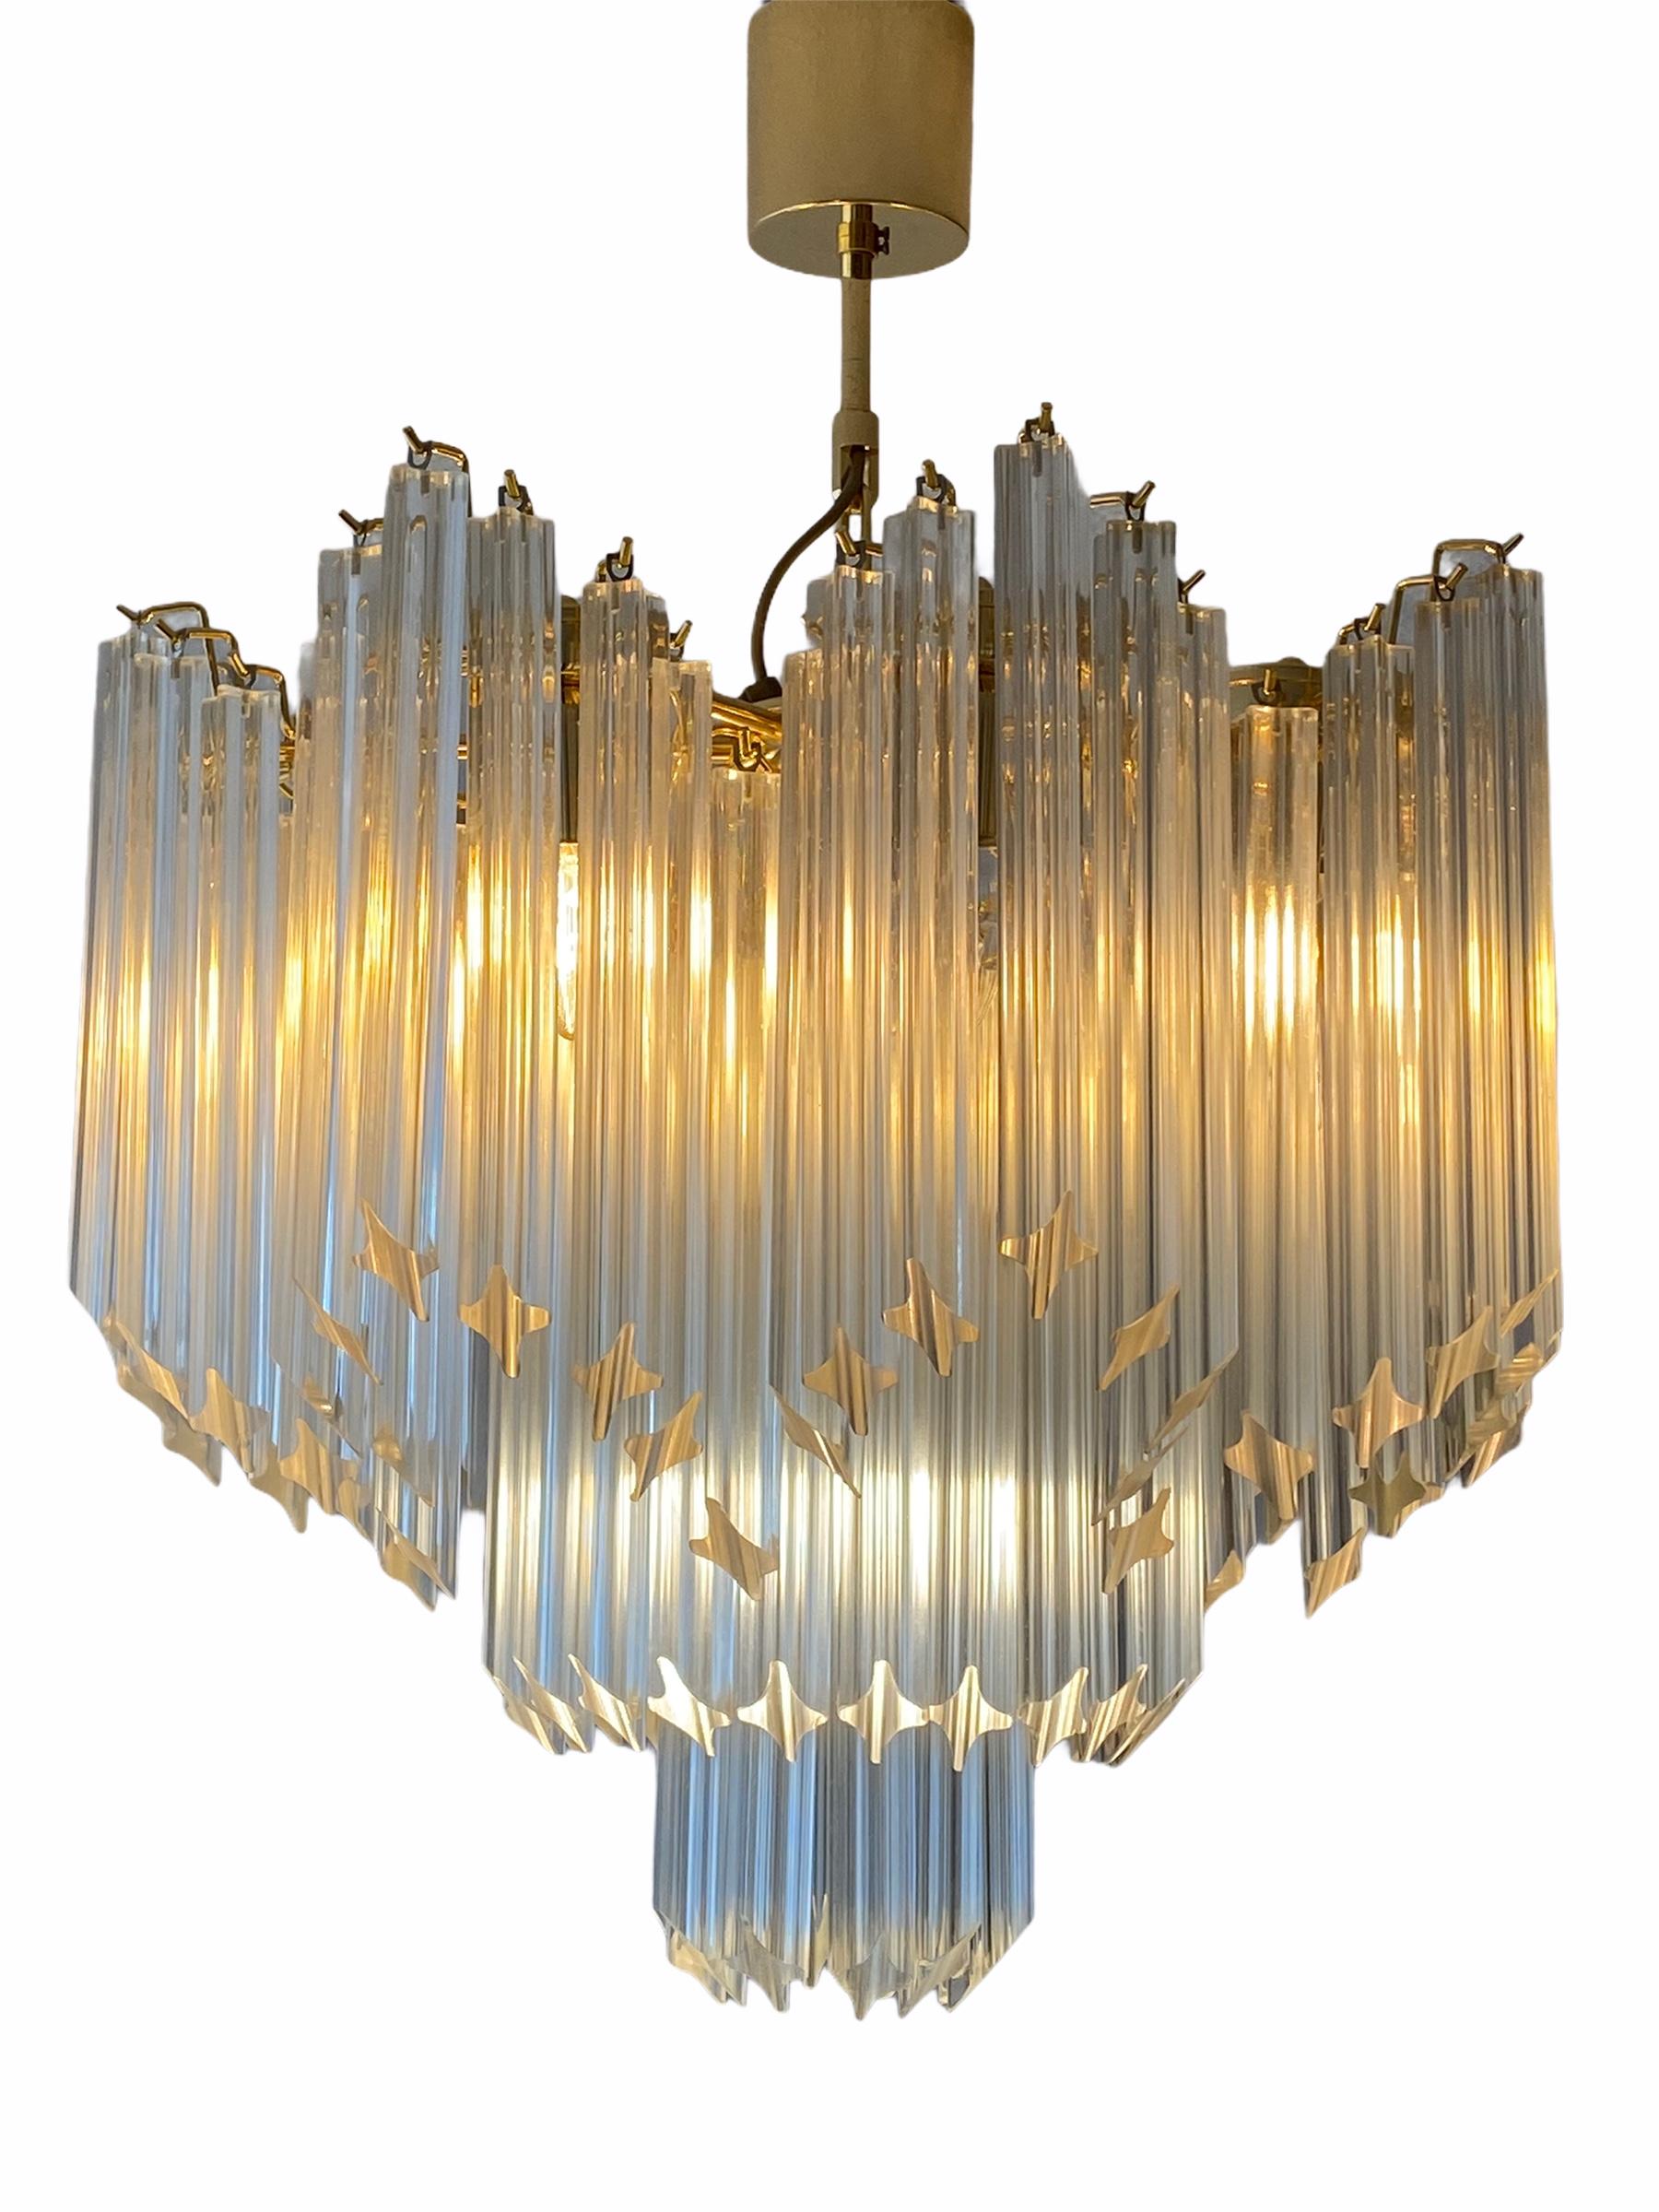 Hand-Crafted Stunning Murano Chandelier Transparent Quadriedri Prism, Vintage, Italy, 1980s